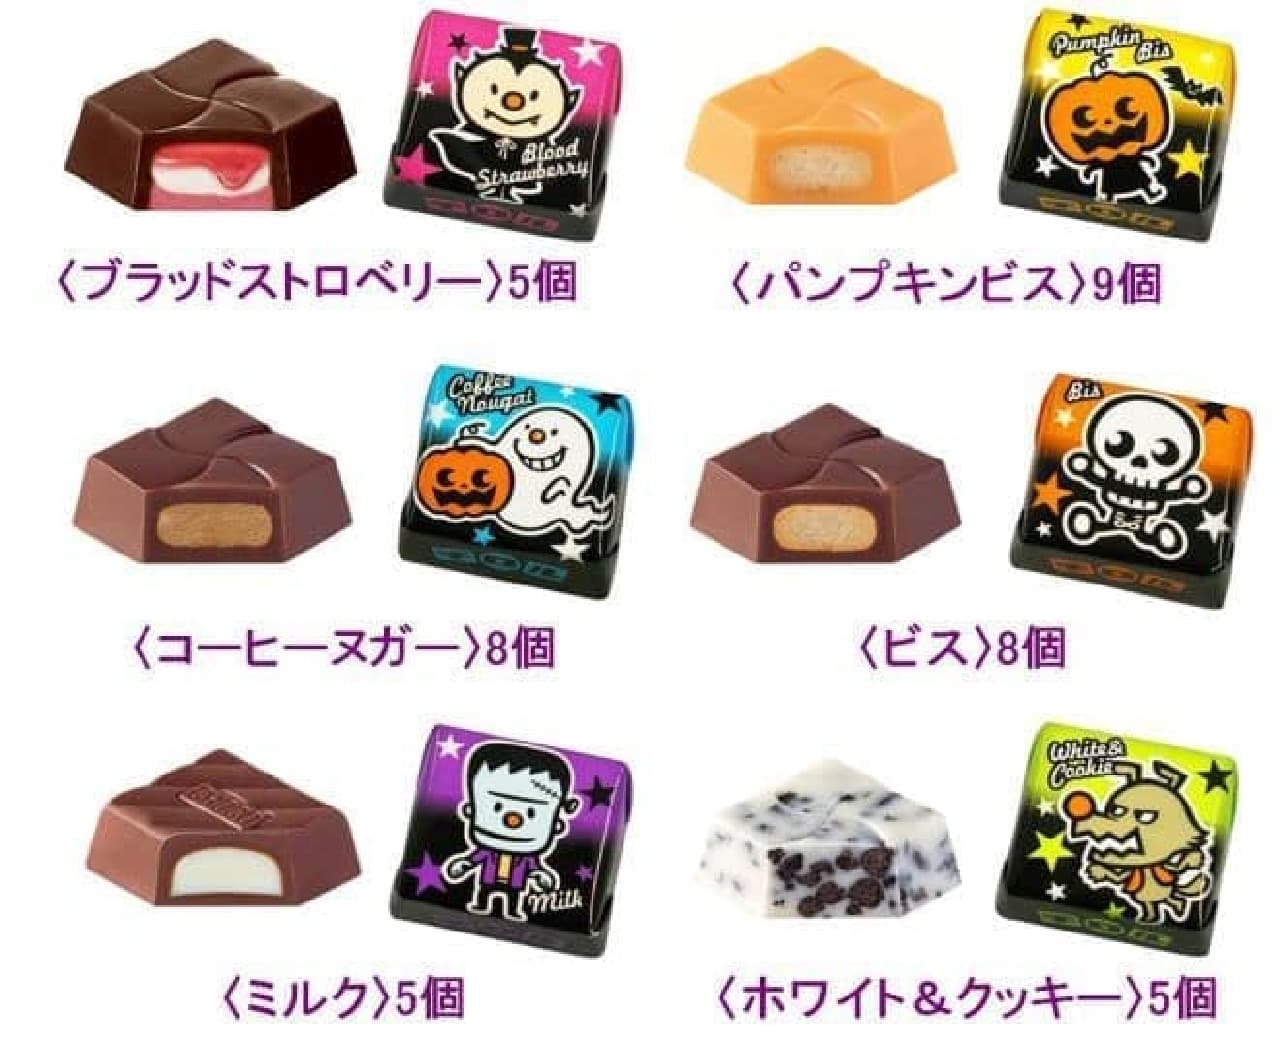 Tyrolean chocolate new product "Halloween Cup"